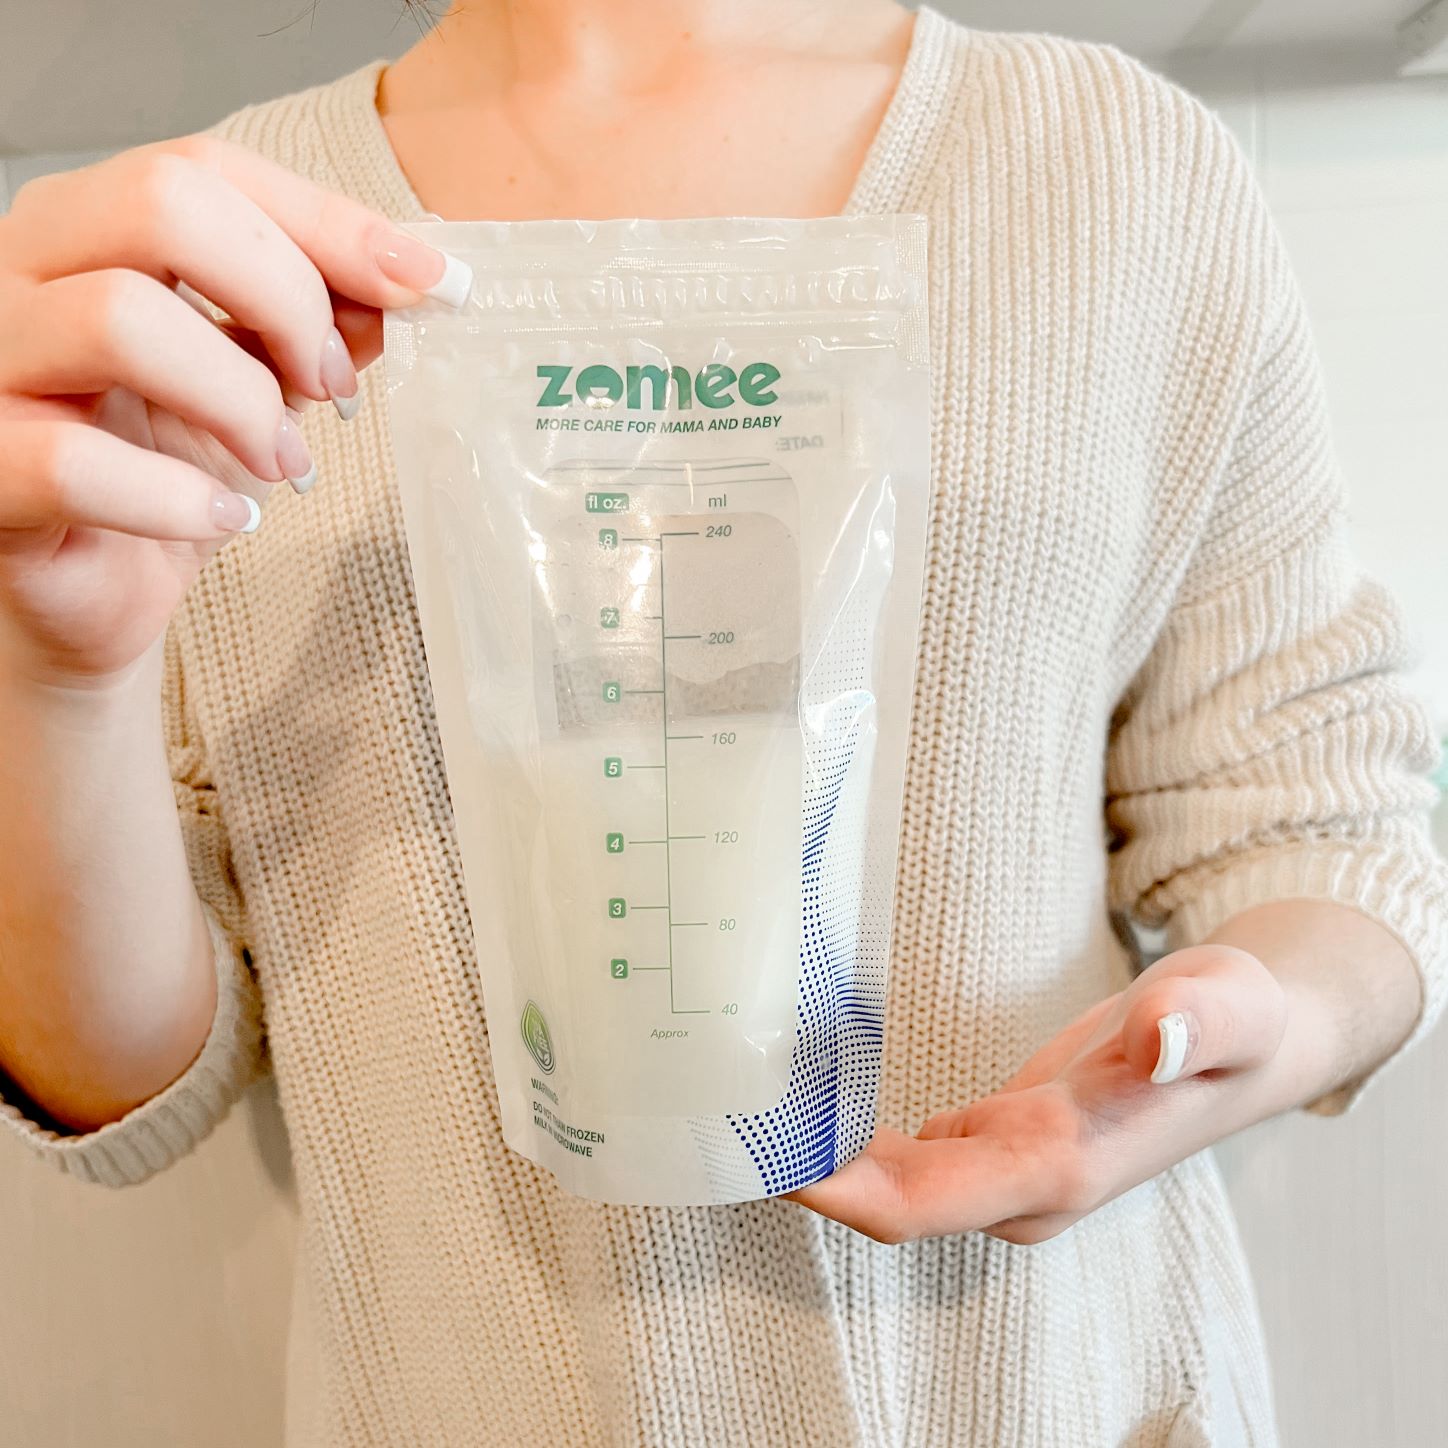 Breast Milk Storage Bags: How To Use Them Safely